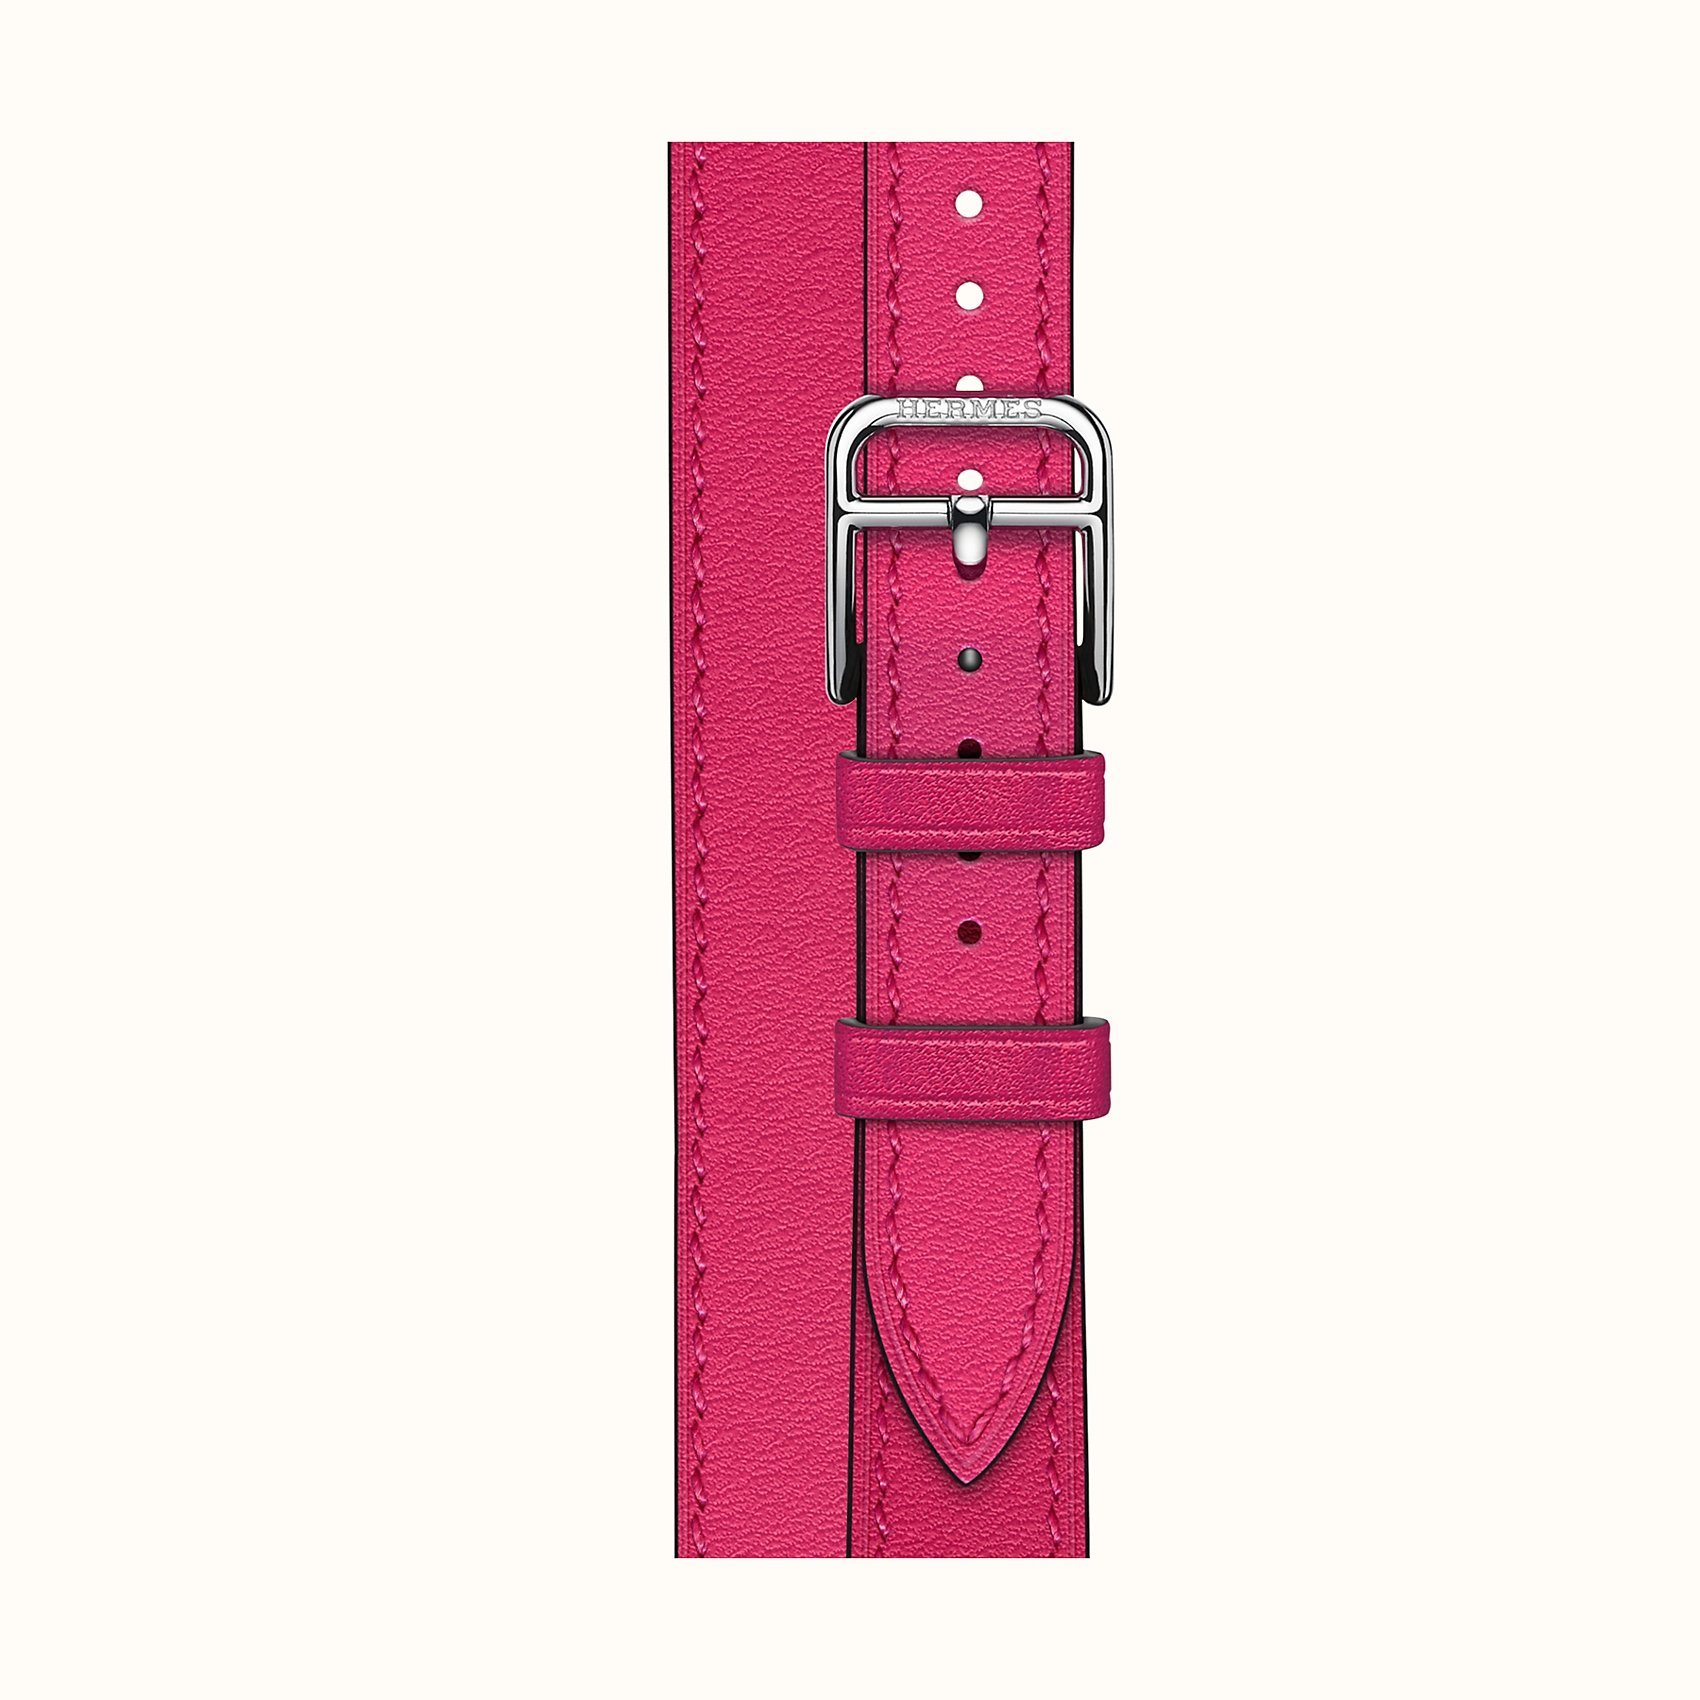 Hermès pink variation that carries happiness